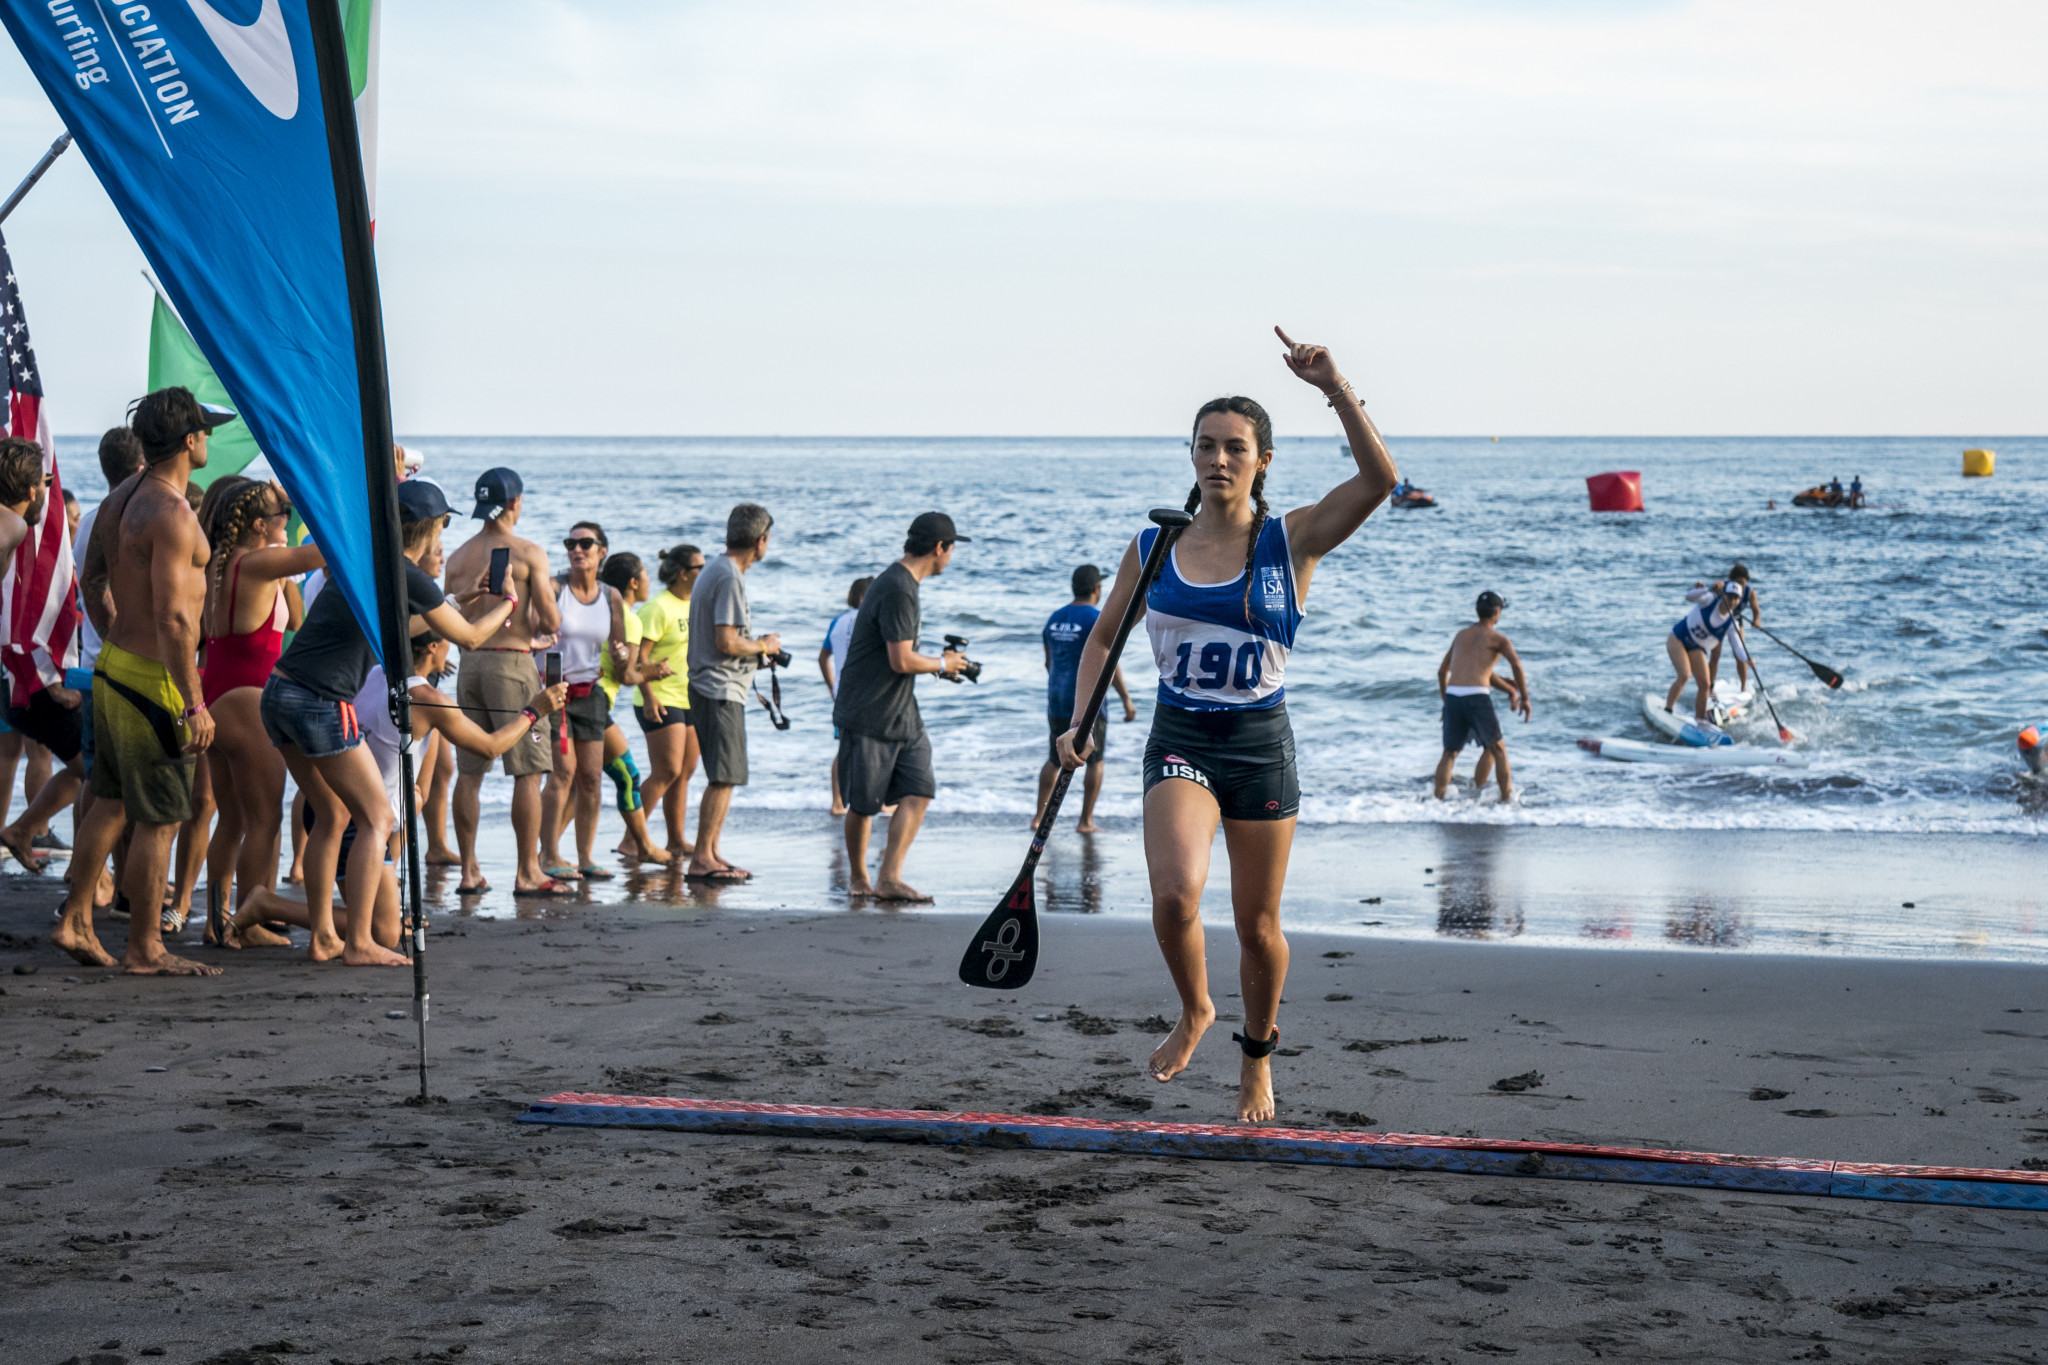 Jade Howson from the United States won the standup paddle sprint race to give her team off to a winning start ©ISA 